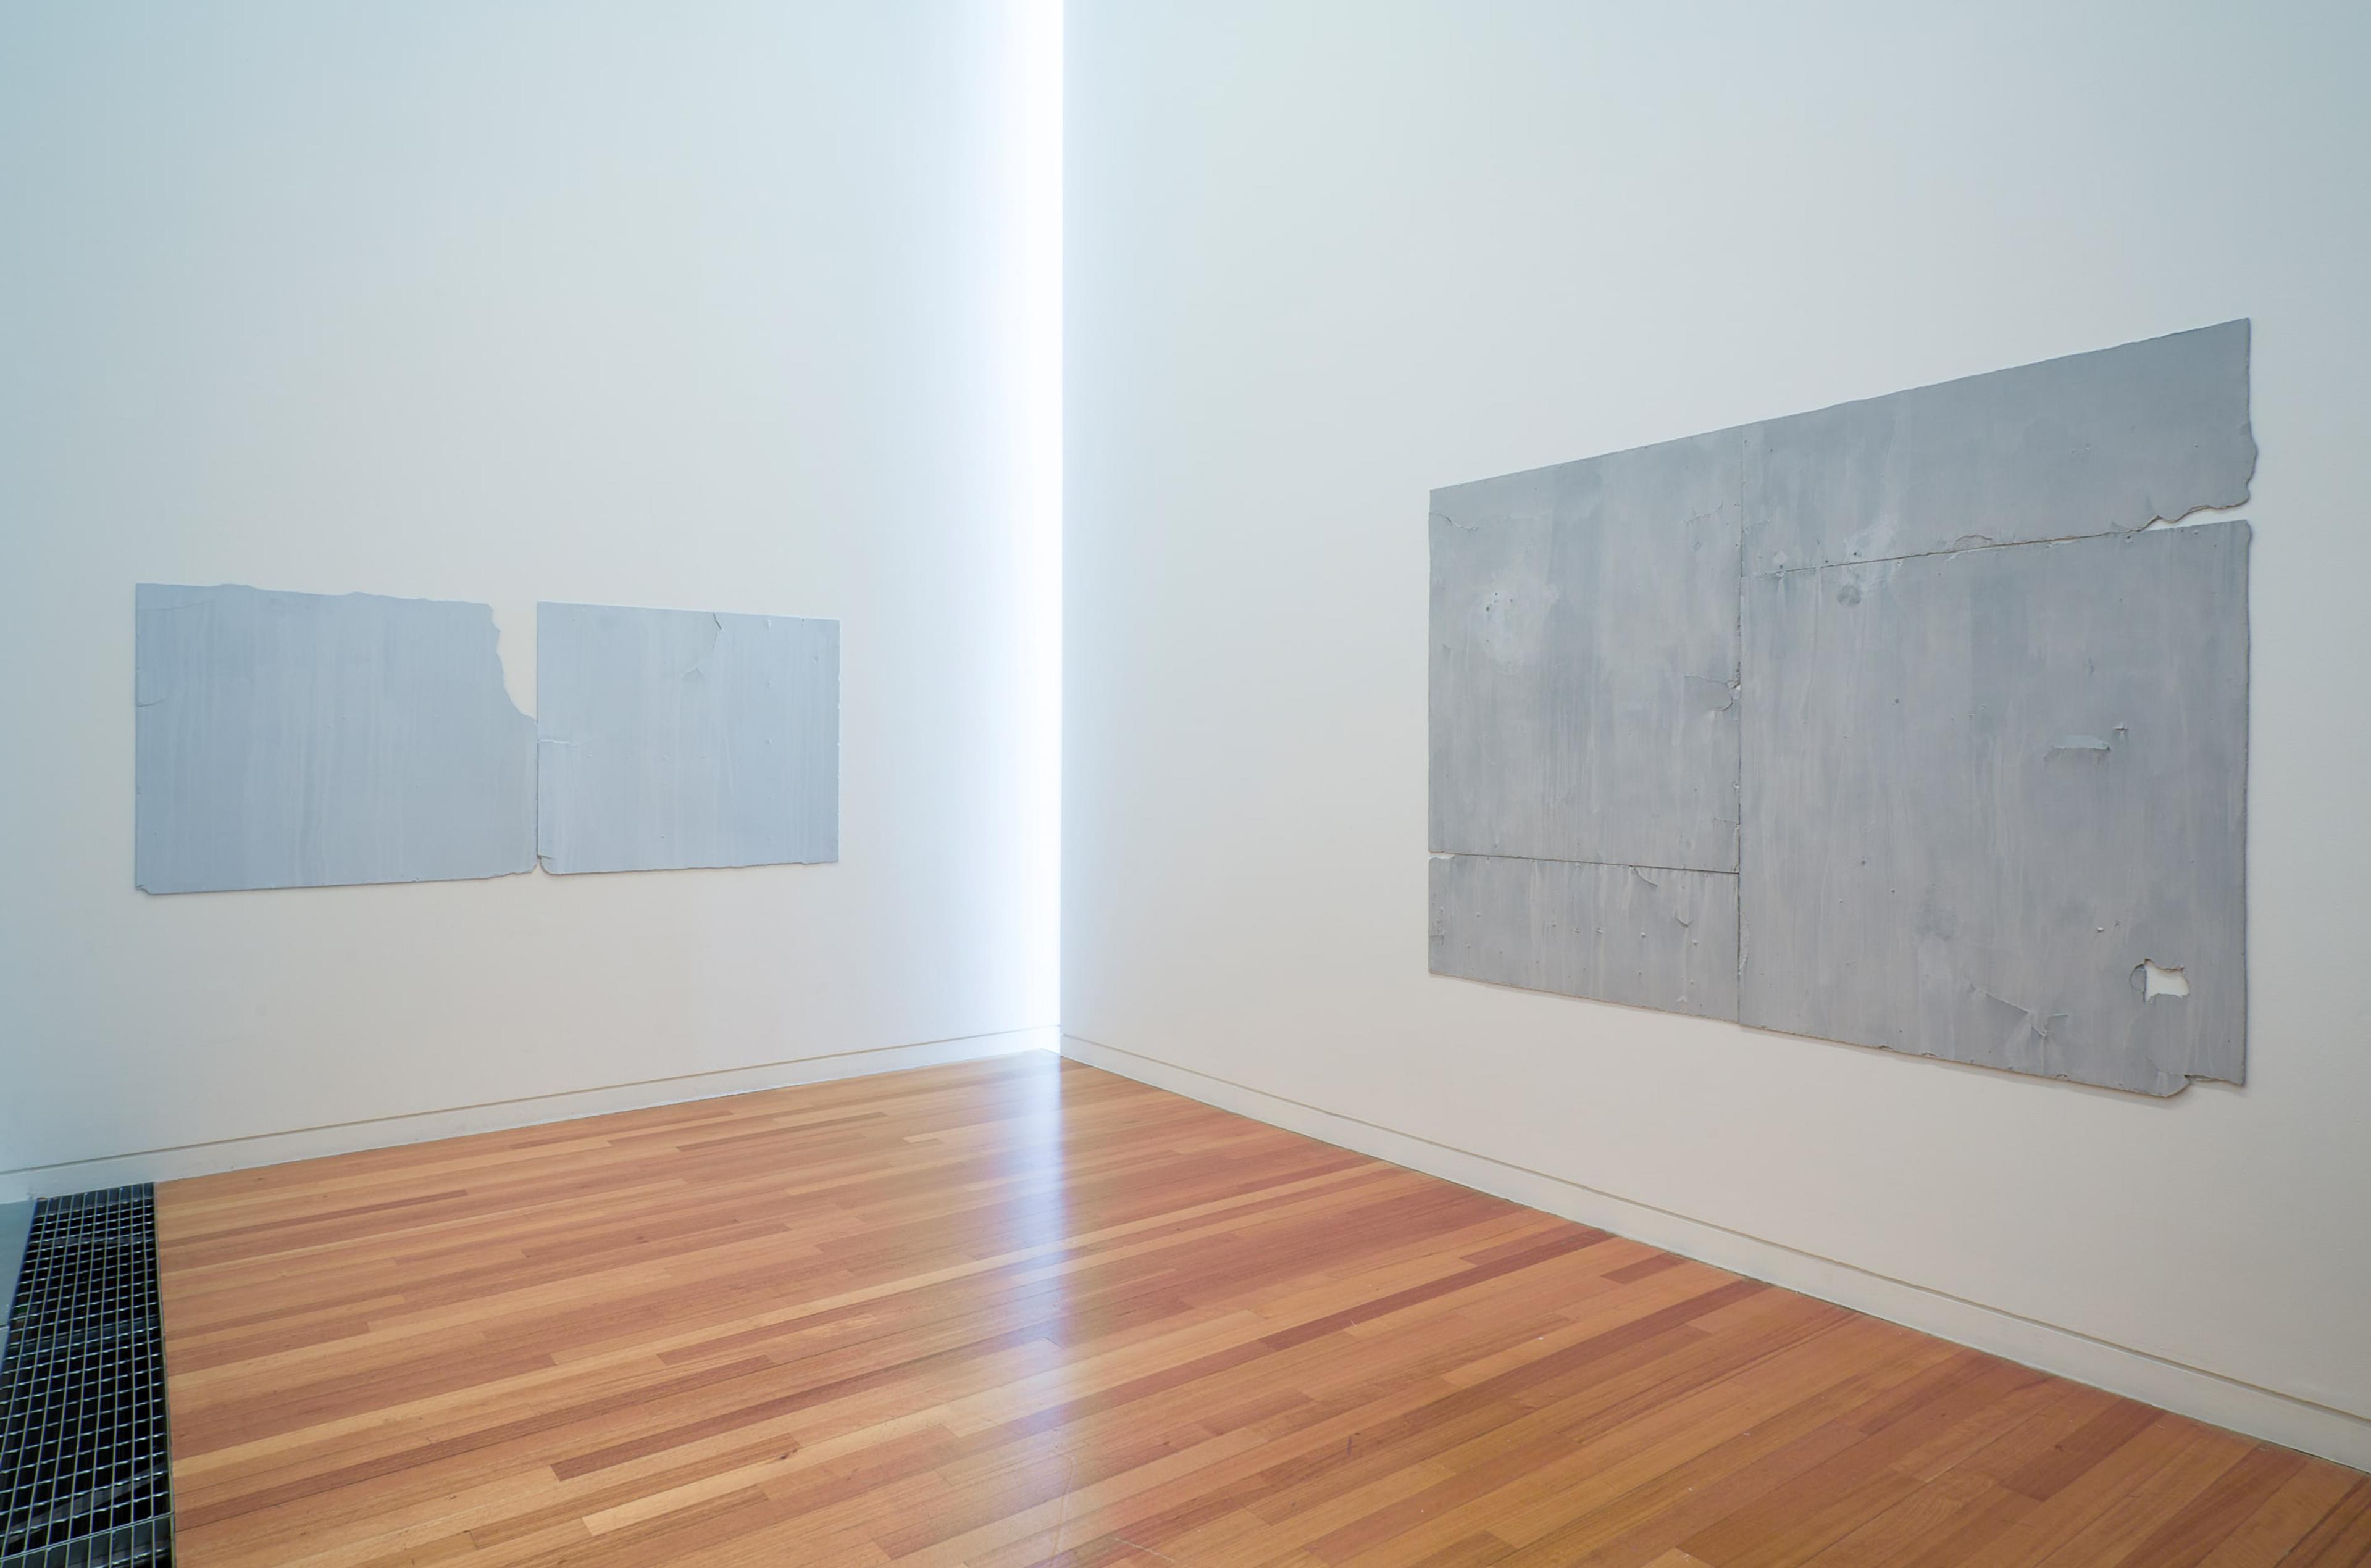 Installation view of two paintings from the something possible or i will suffocate series (2009) in the exhibition what is a life? kim pieters at the Adam Art Gallery, Victoria University of Wellington (photo: Shaun Waugh)